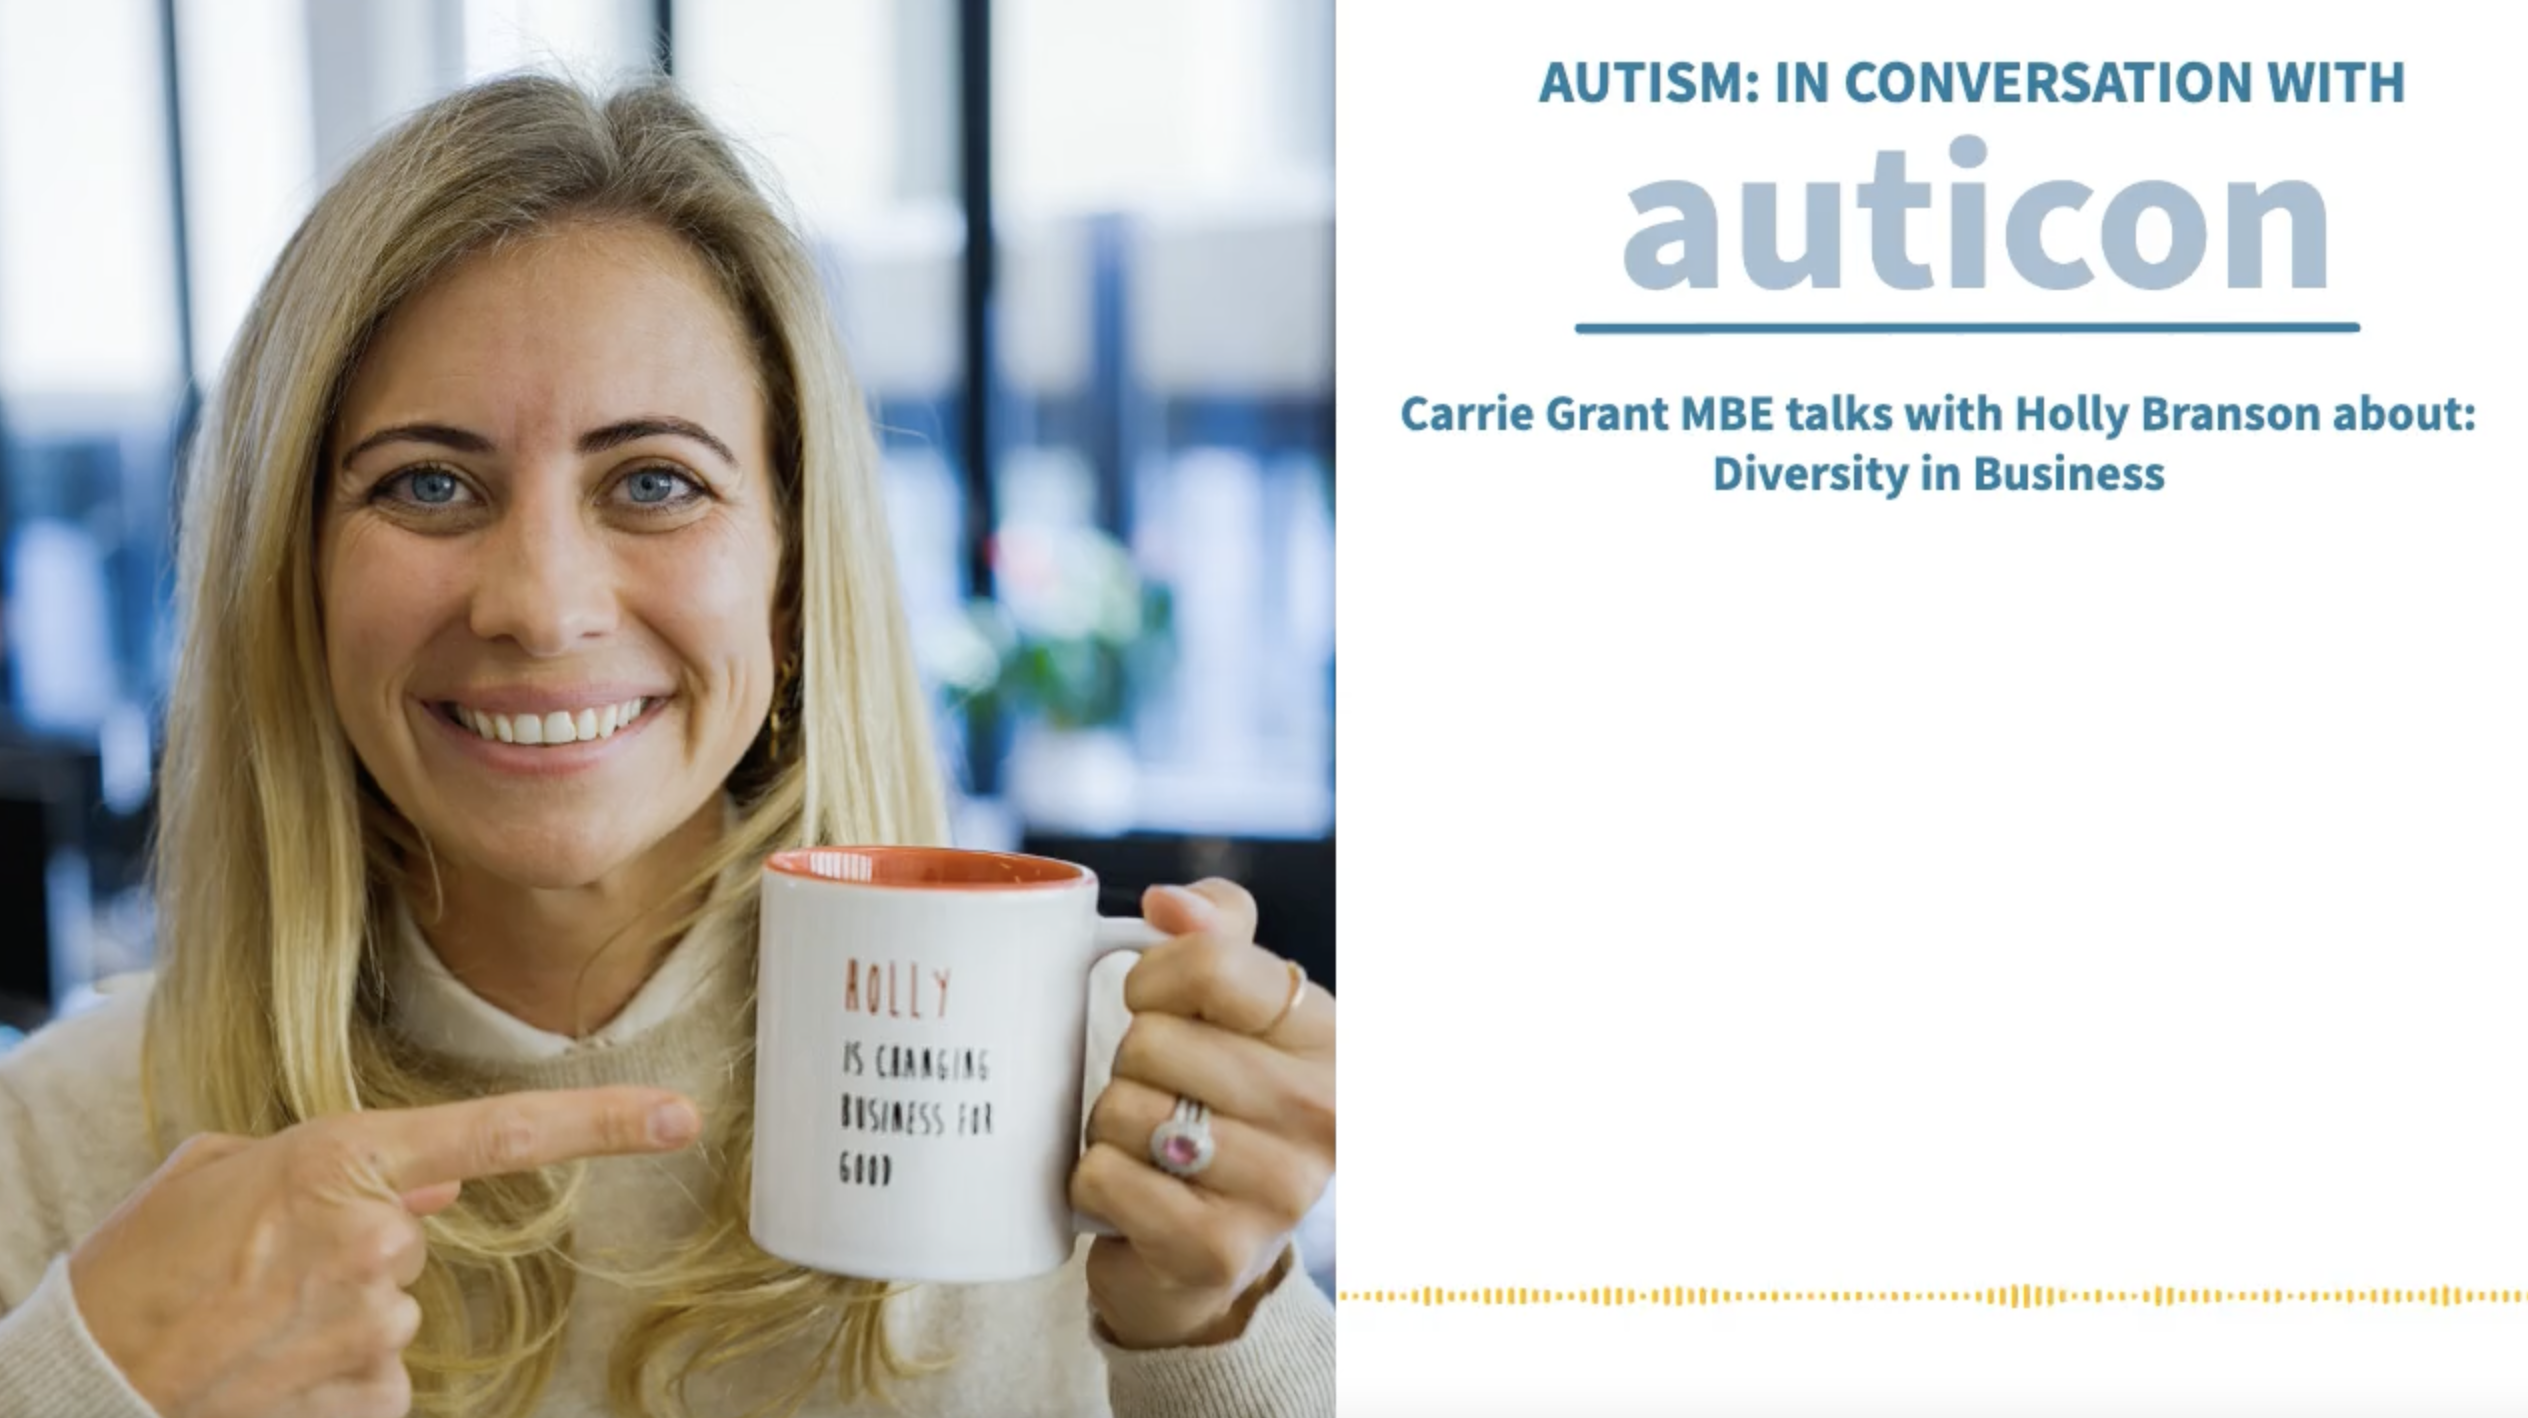 Holly Branson disucssing neurodiverisity on the auticon podcast with Carrie Grant MBE